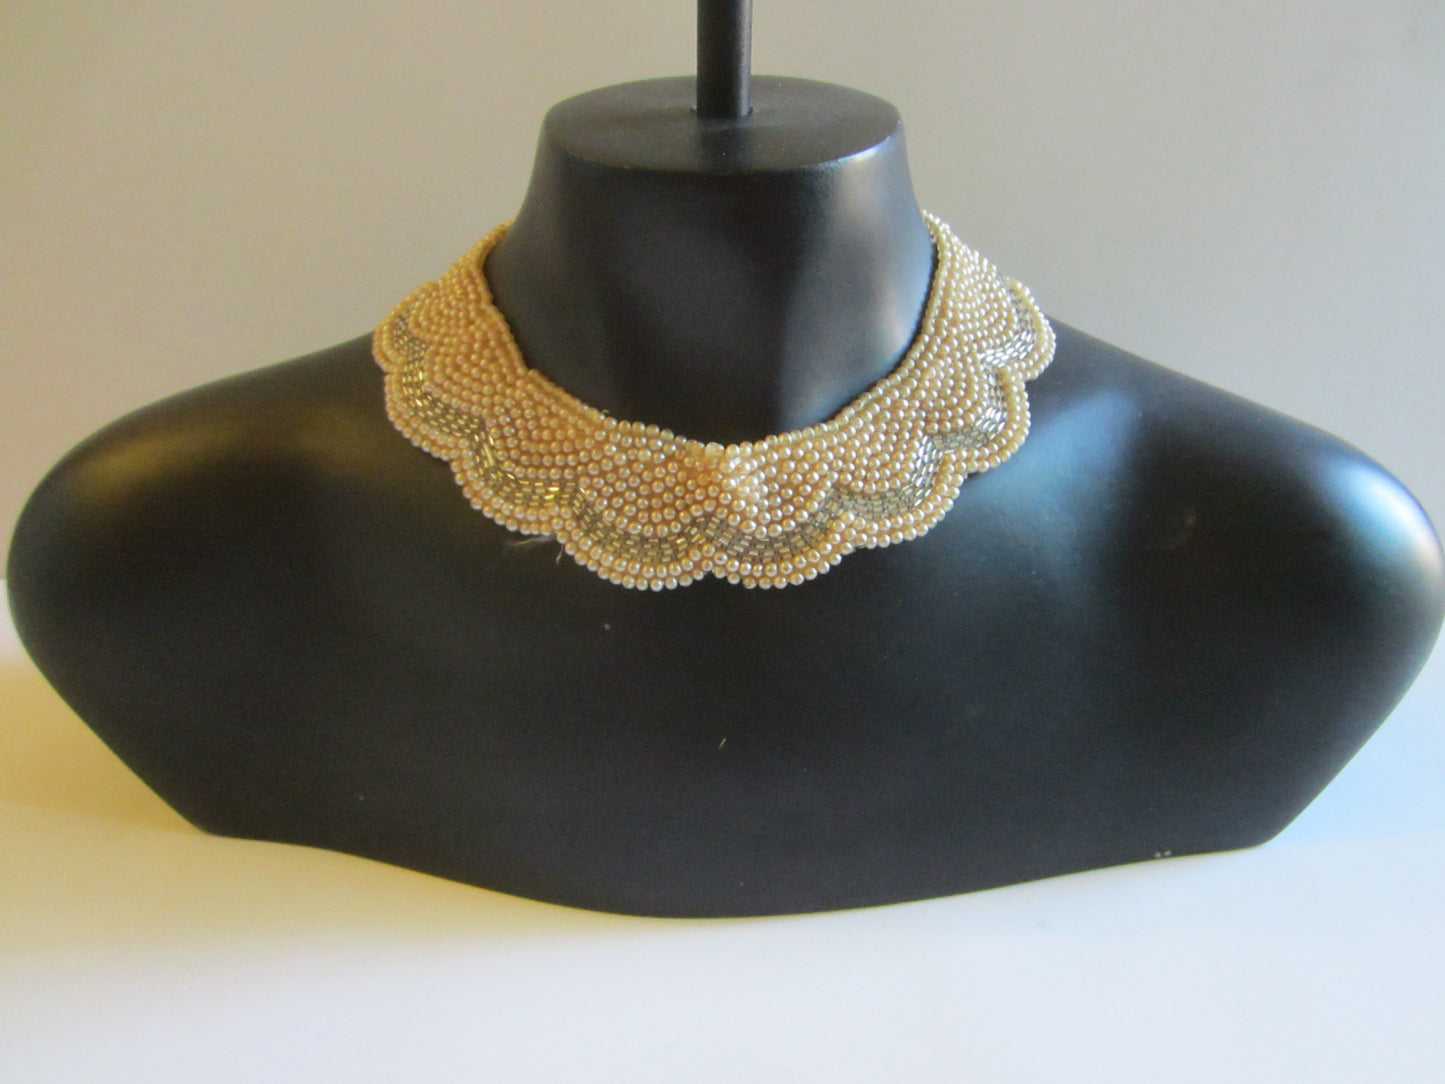 Delco Japan Bib Necklace Collar Decorated Pearl Beads